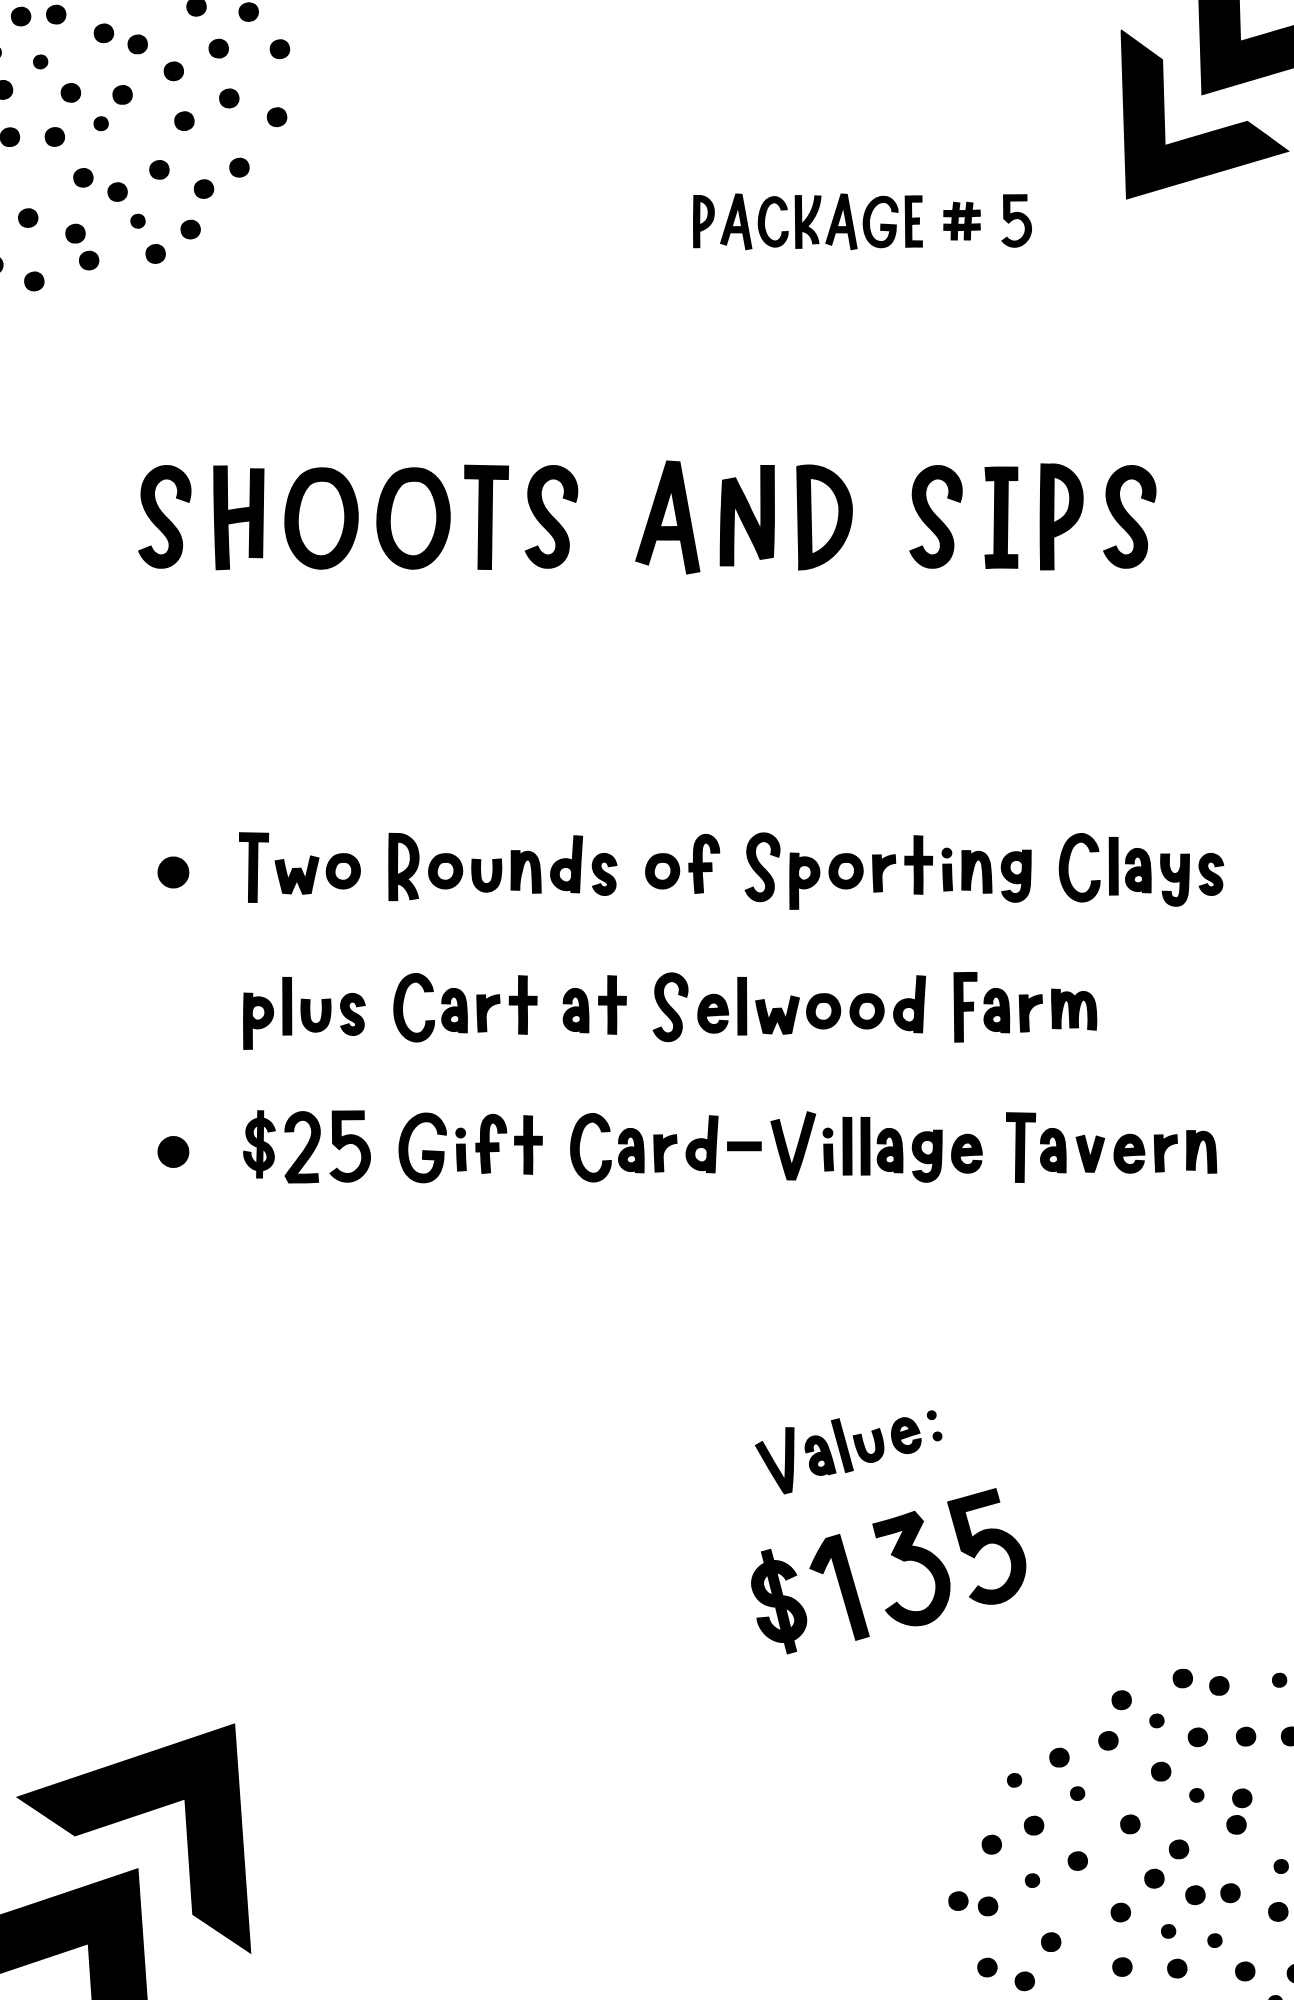 Auction Item # 5: Shoots and Sips